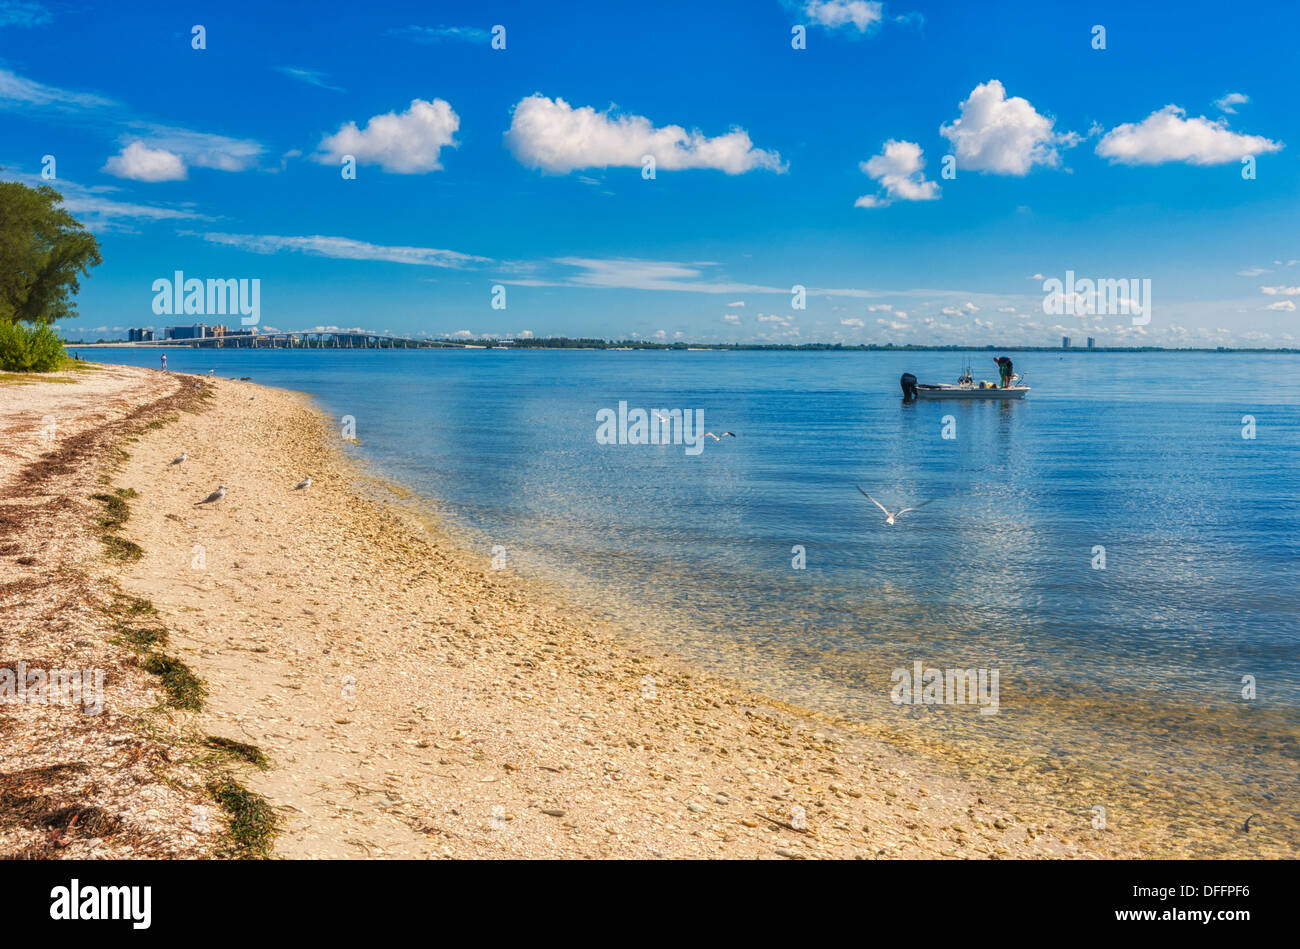 Two men fish at a distance near the coast in summer blue sky and ocean. Causeway in background. Stock Photo